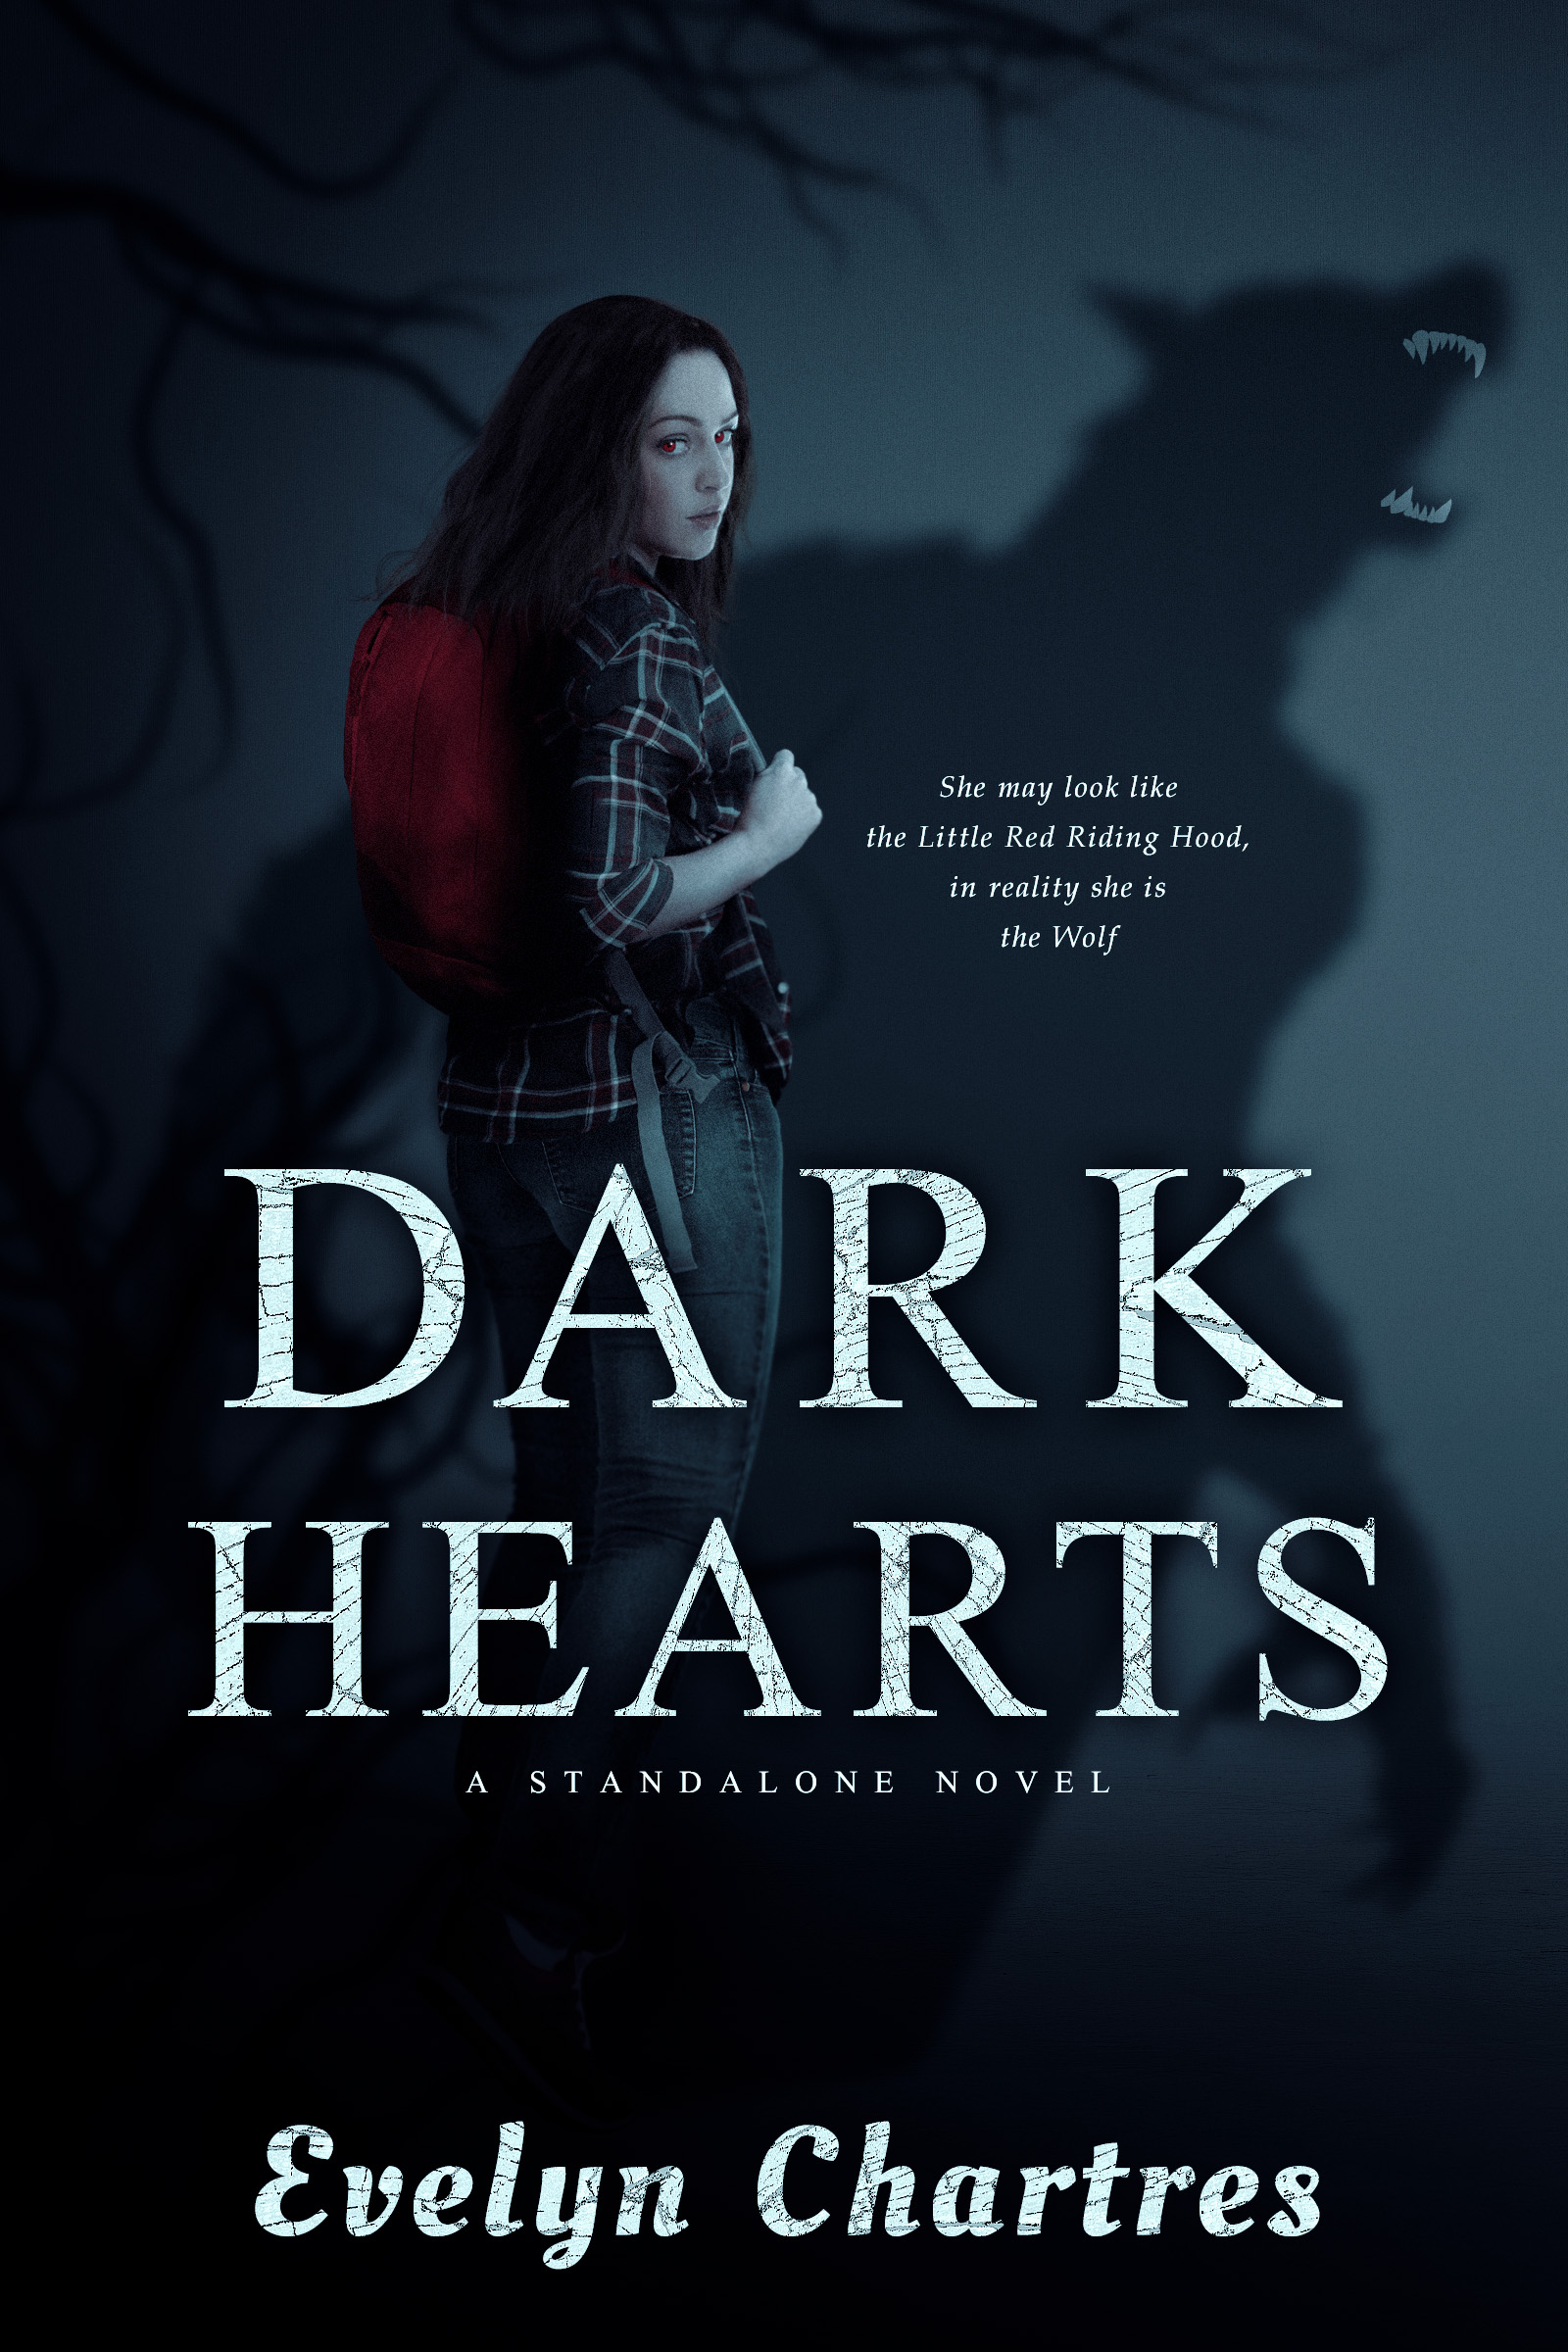 Dark Hearts by Evelyn Chartres